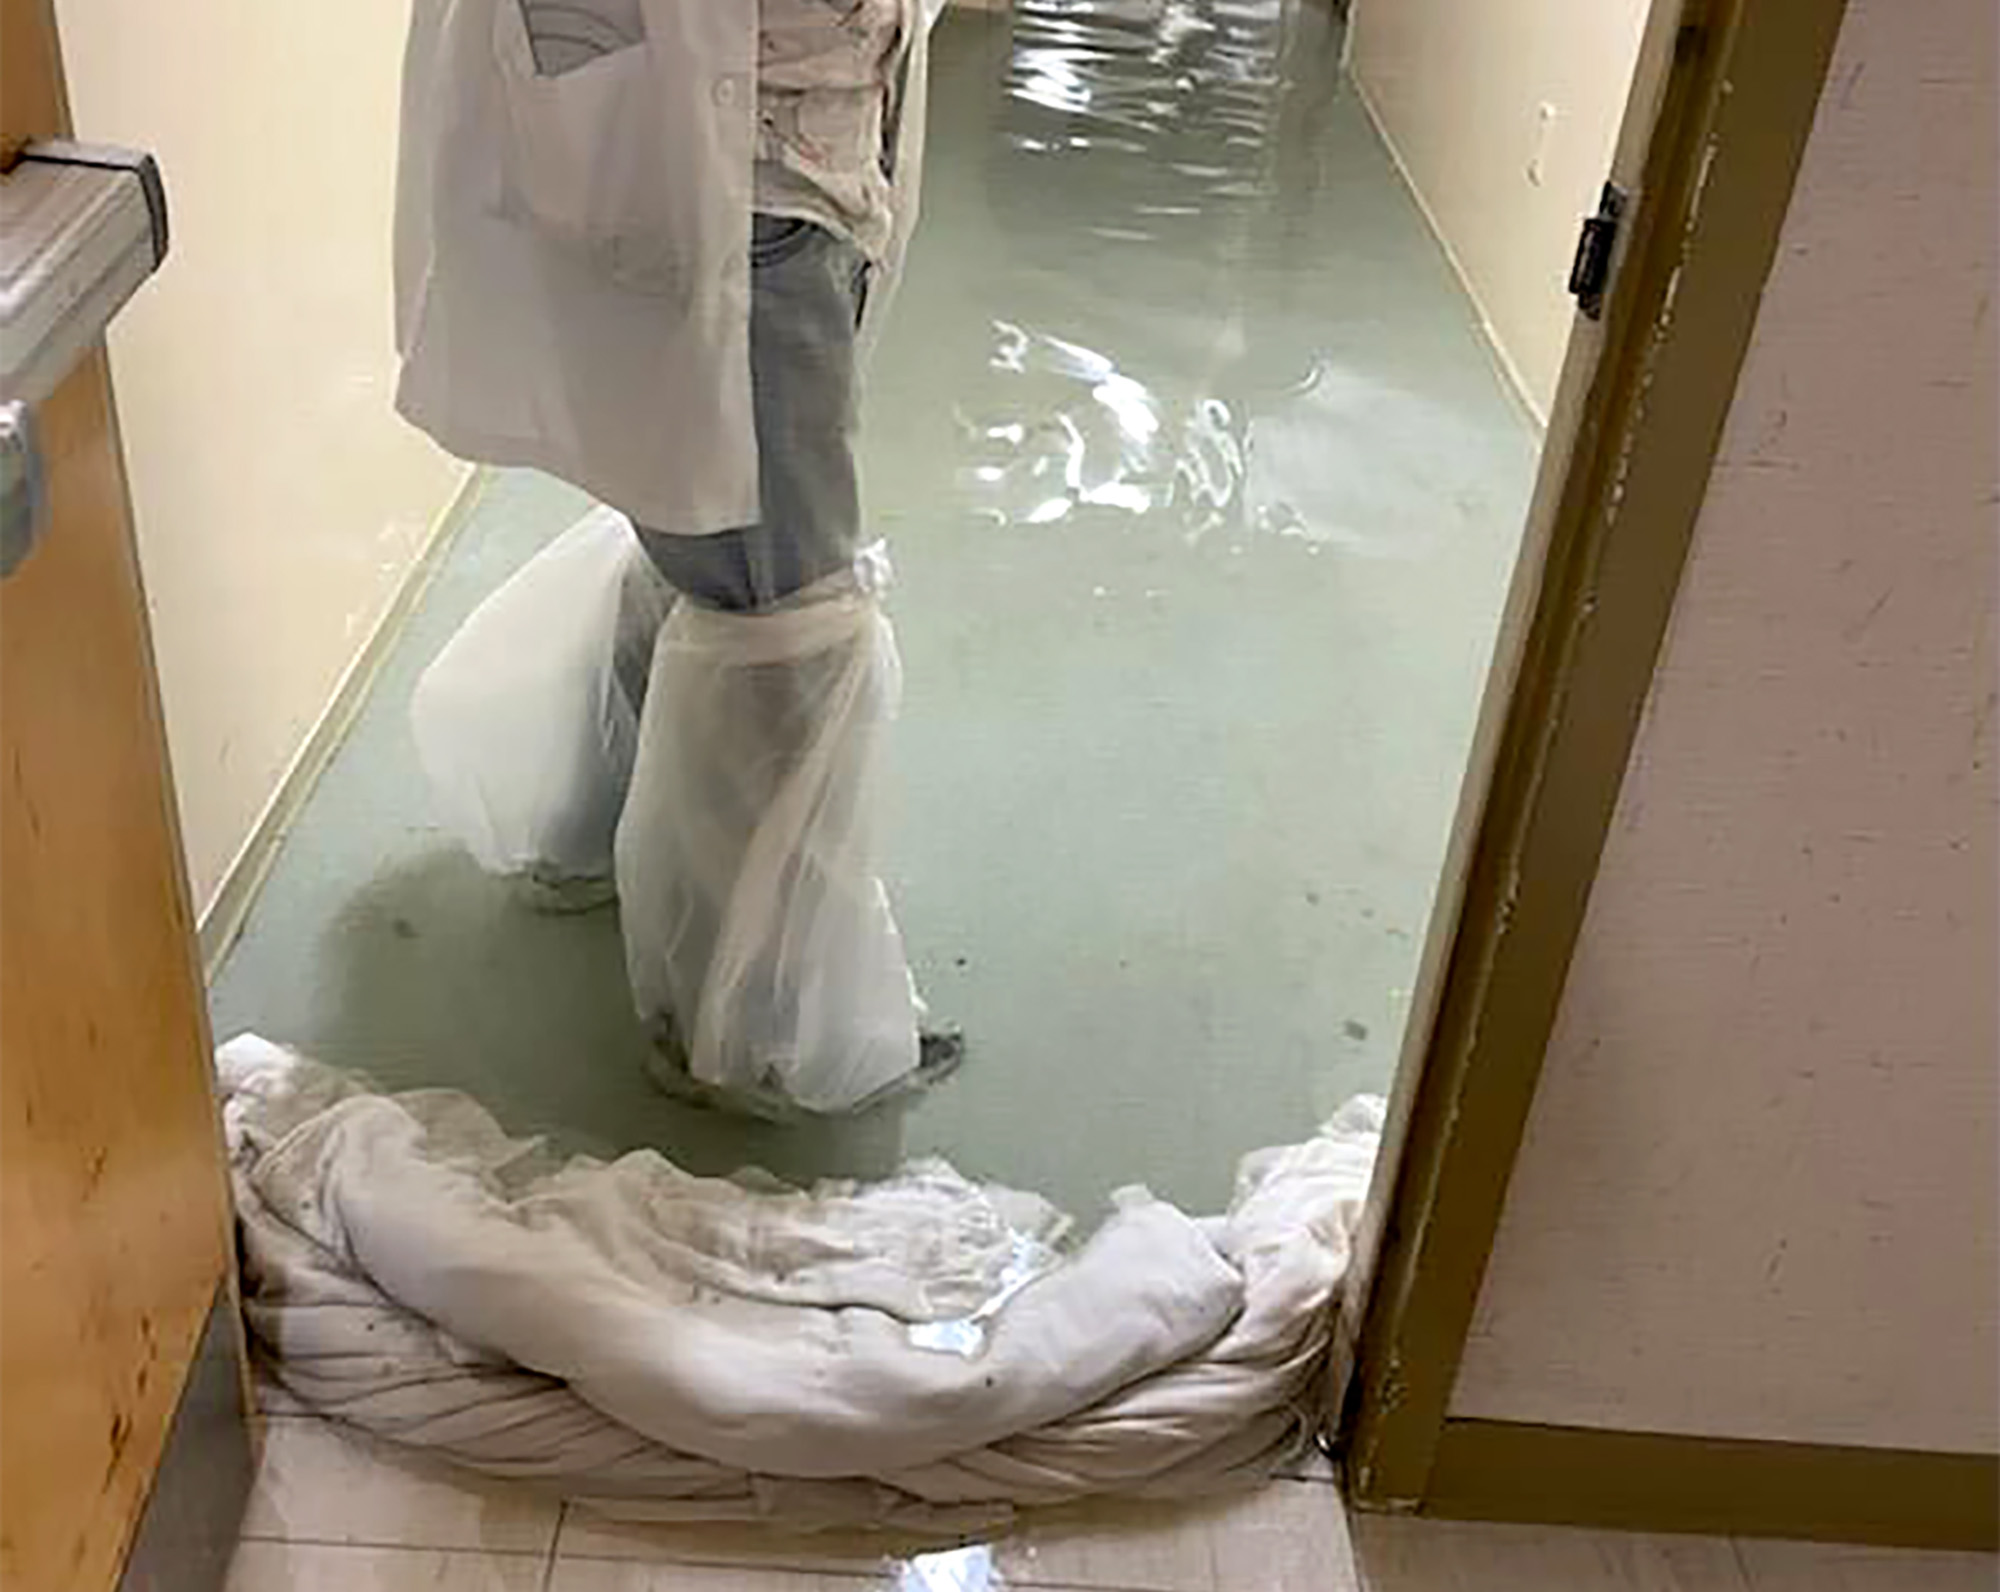 In a photo provided by Dr. Birgit Bodine shows a staff member standing in a flooded hallway at HCA Florida Fawcett Hospital in Port Charlotte, Fla., Wednesday, Sept. 28.